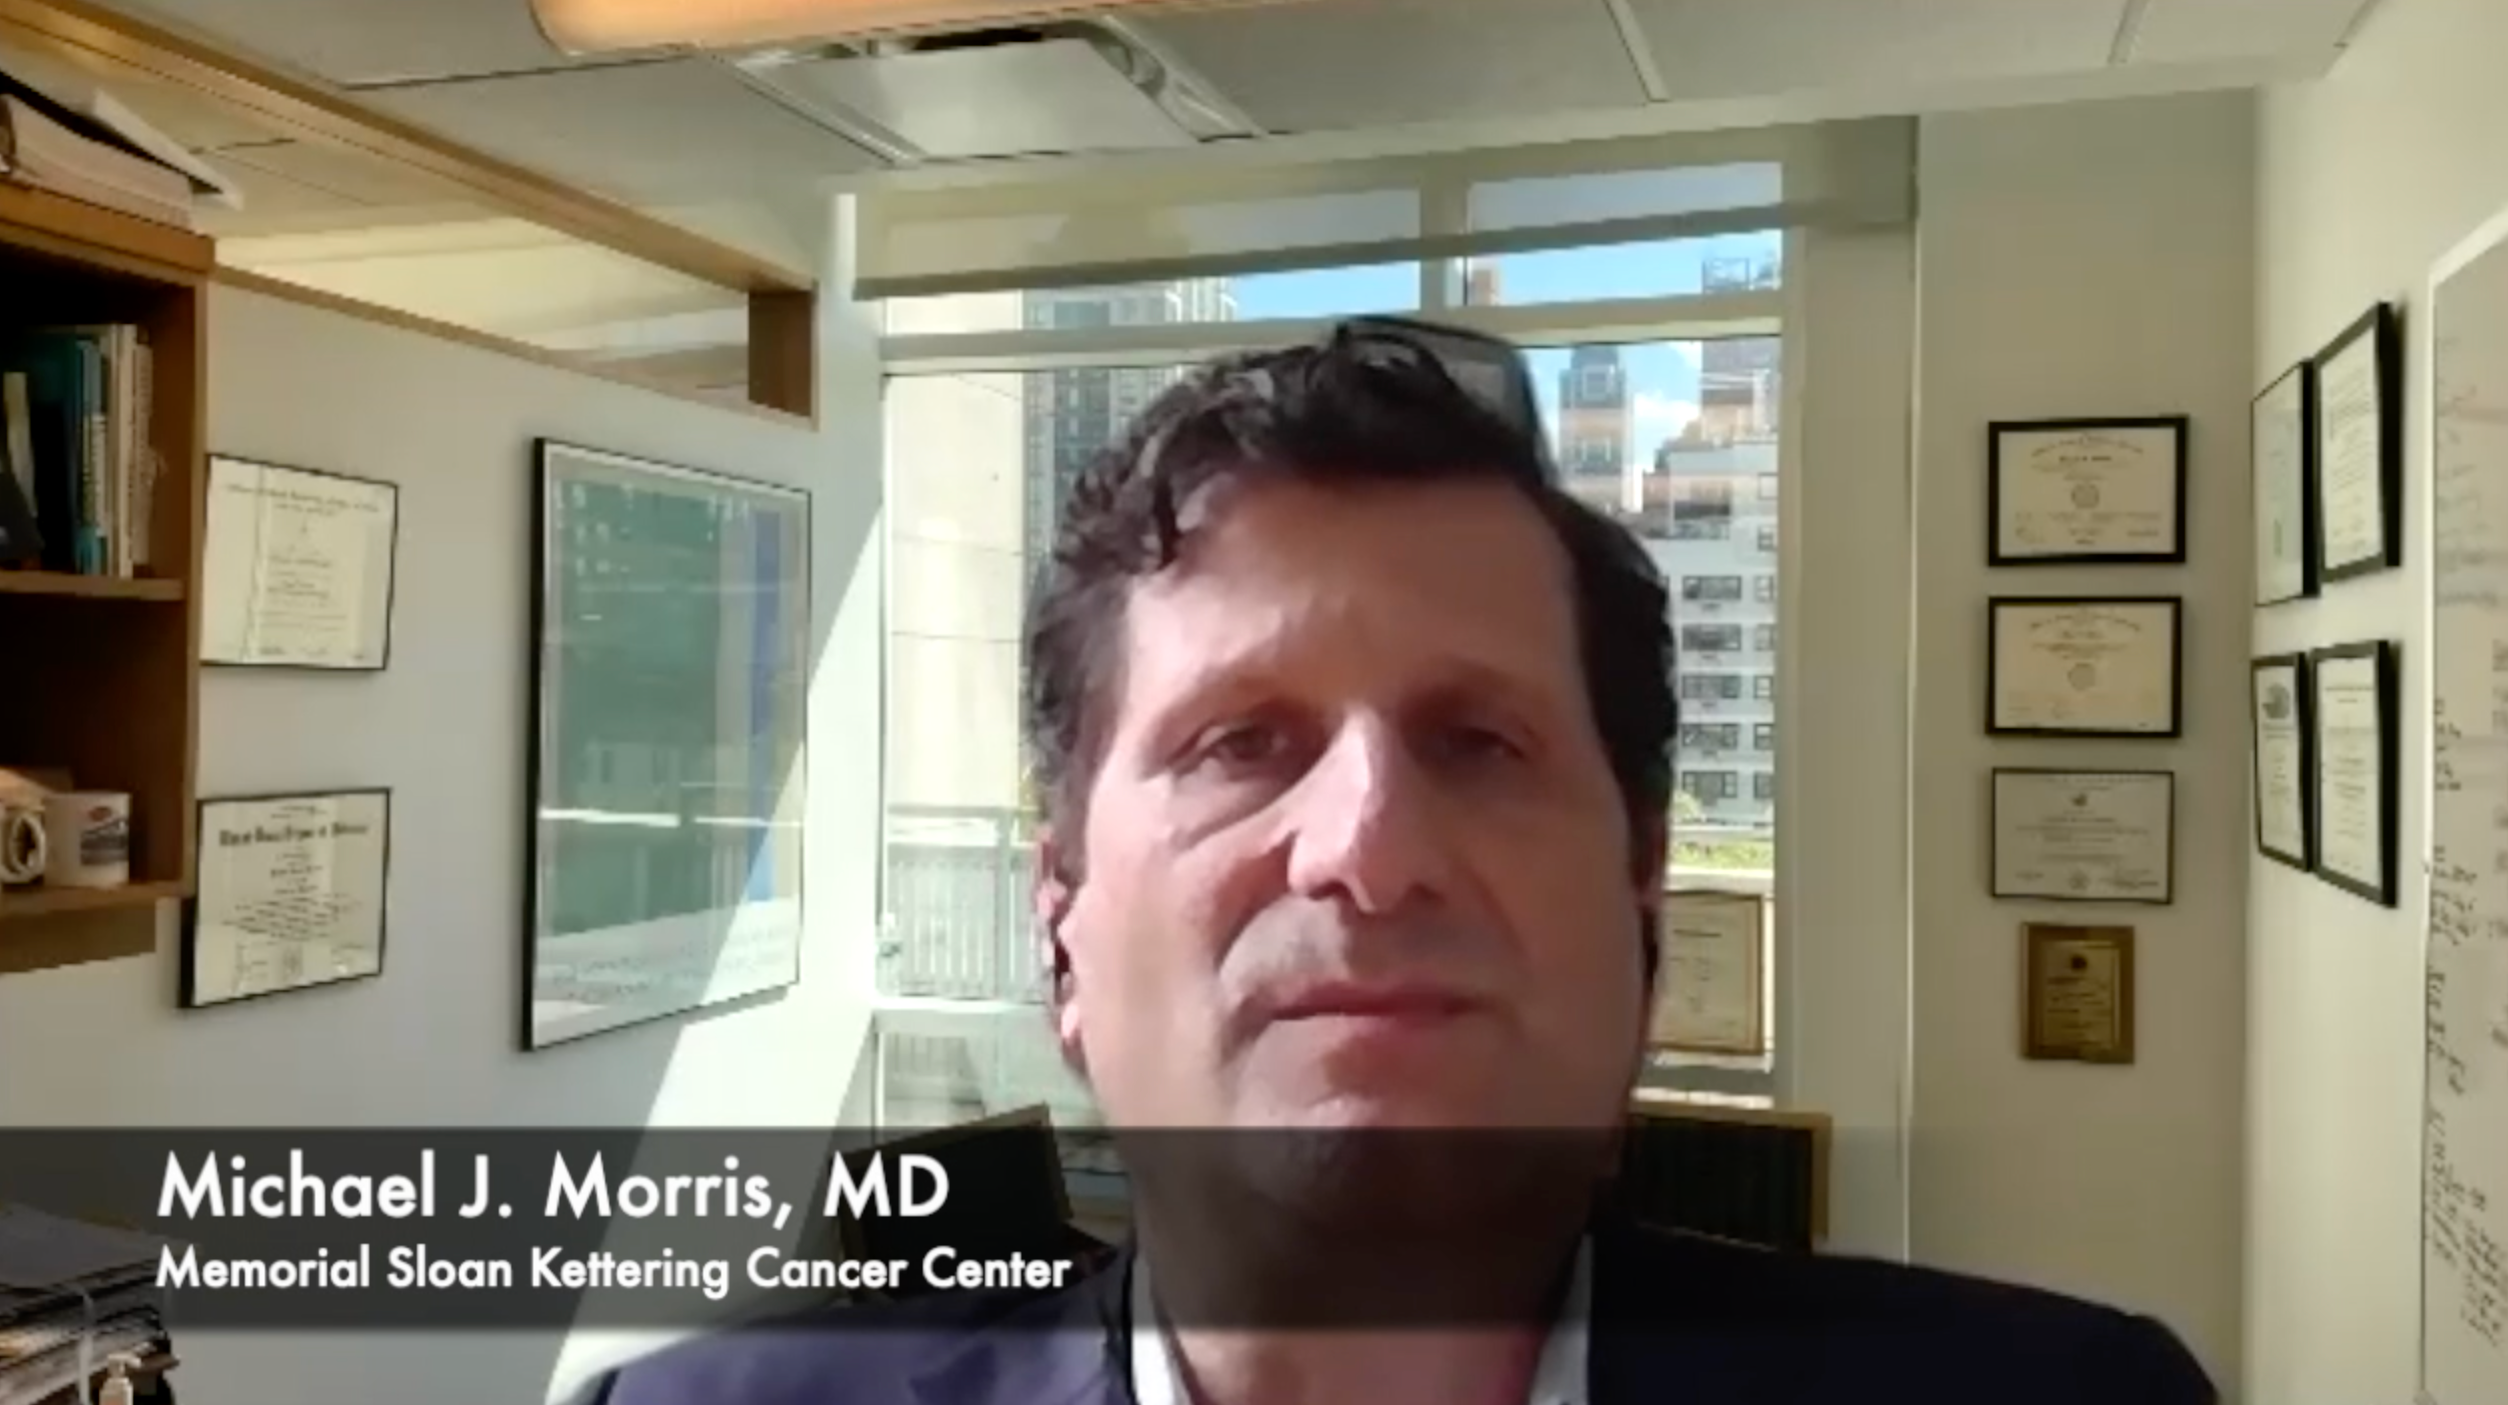 Michael J. Morris, MD on the Impact of PyL-PET/CT Scans on the Clinical Management of Patients With Prostate Cancer